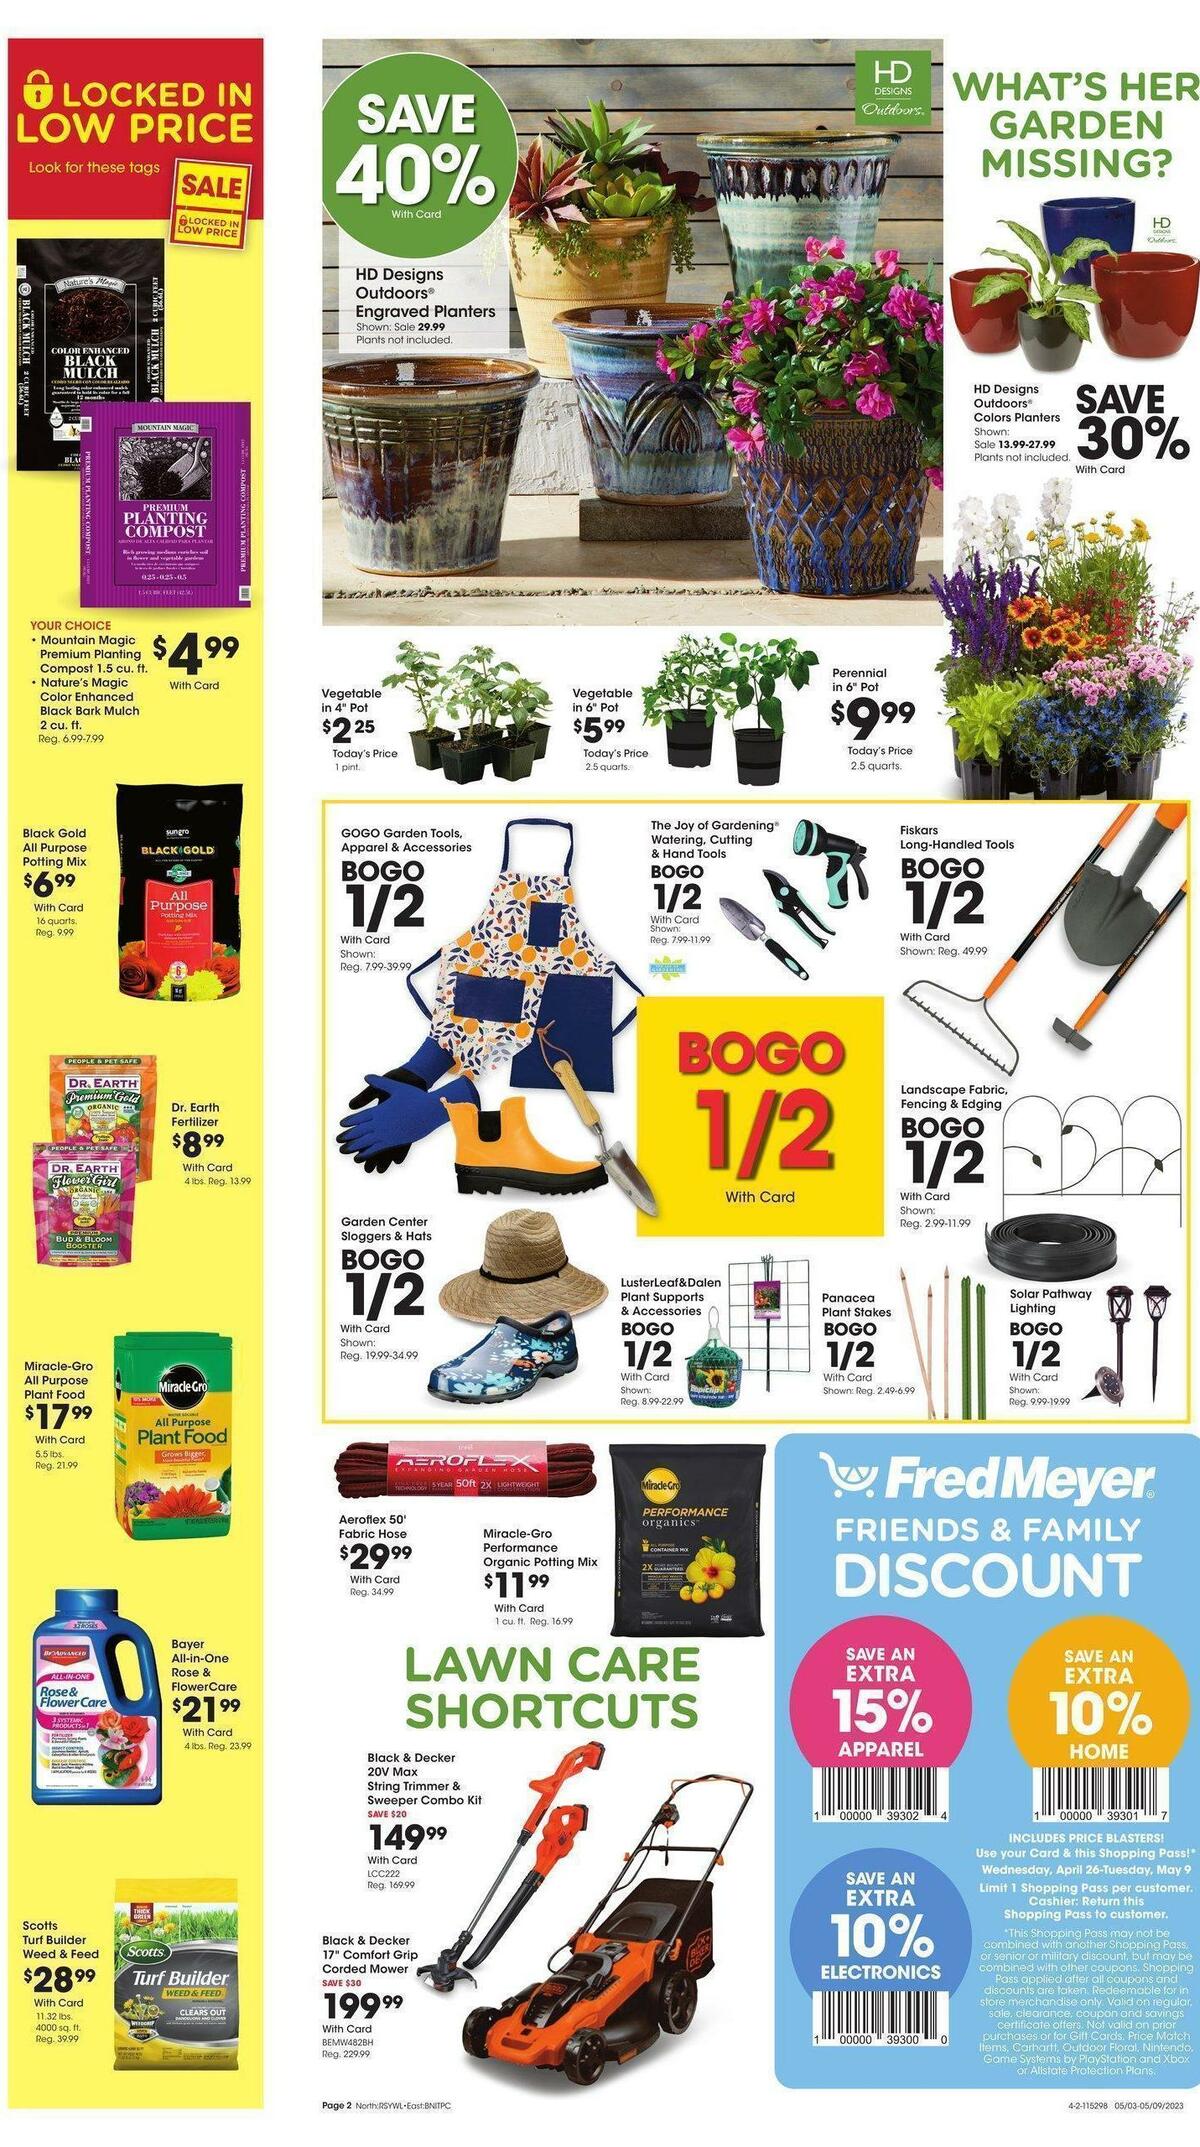 Fred Meyer Garden Weekly Ad from May 3